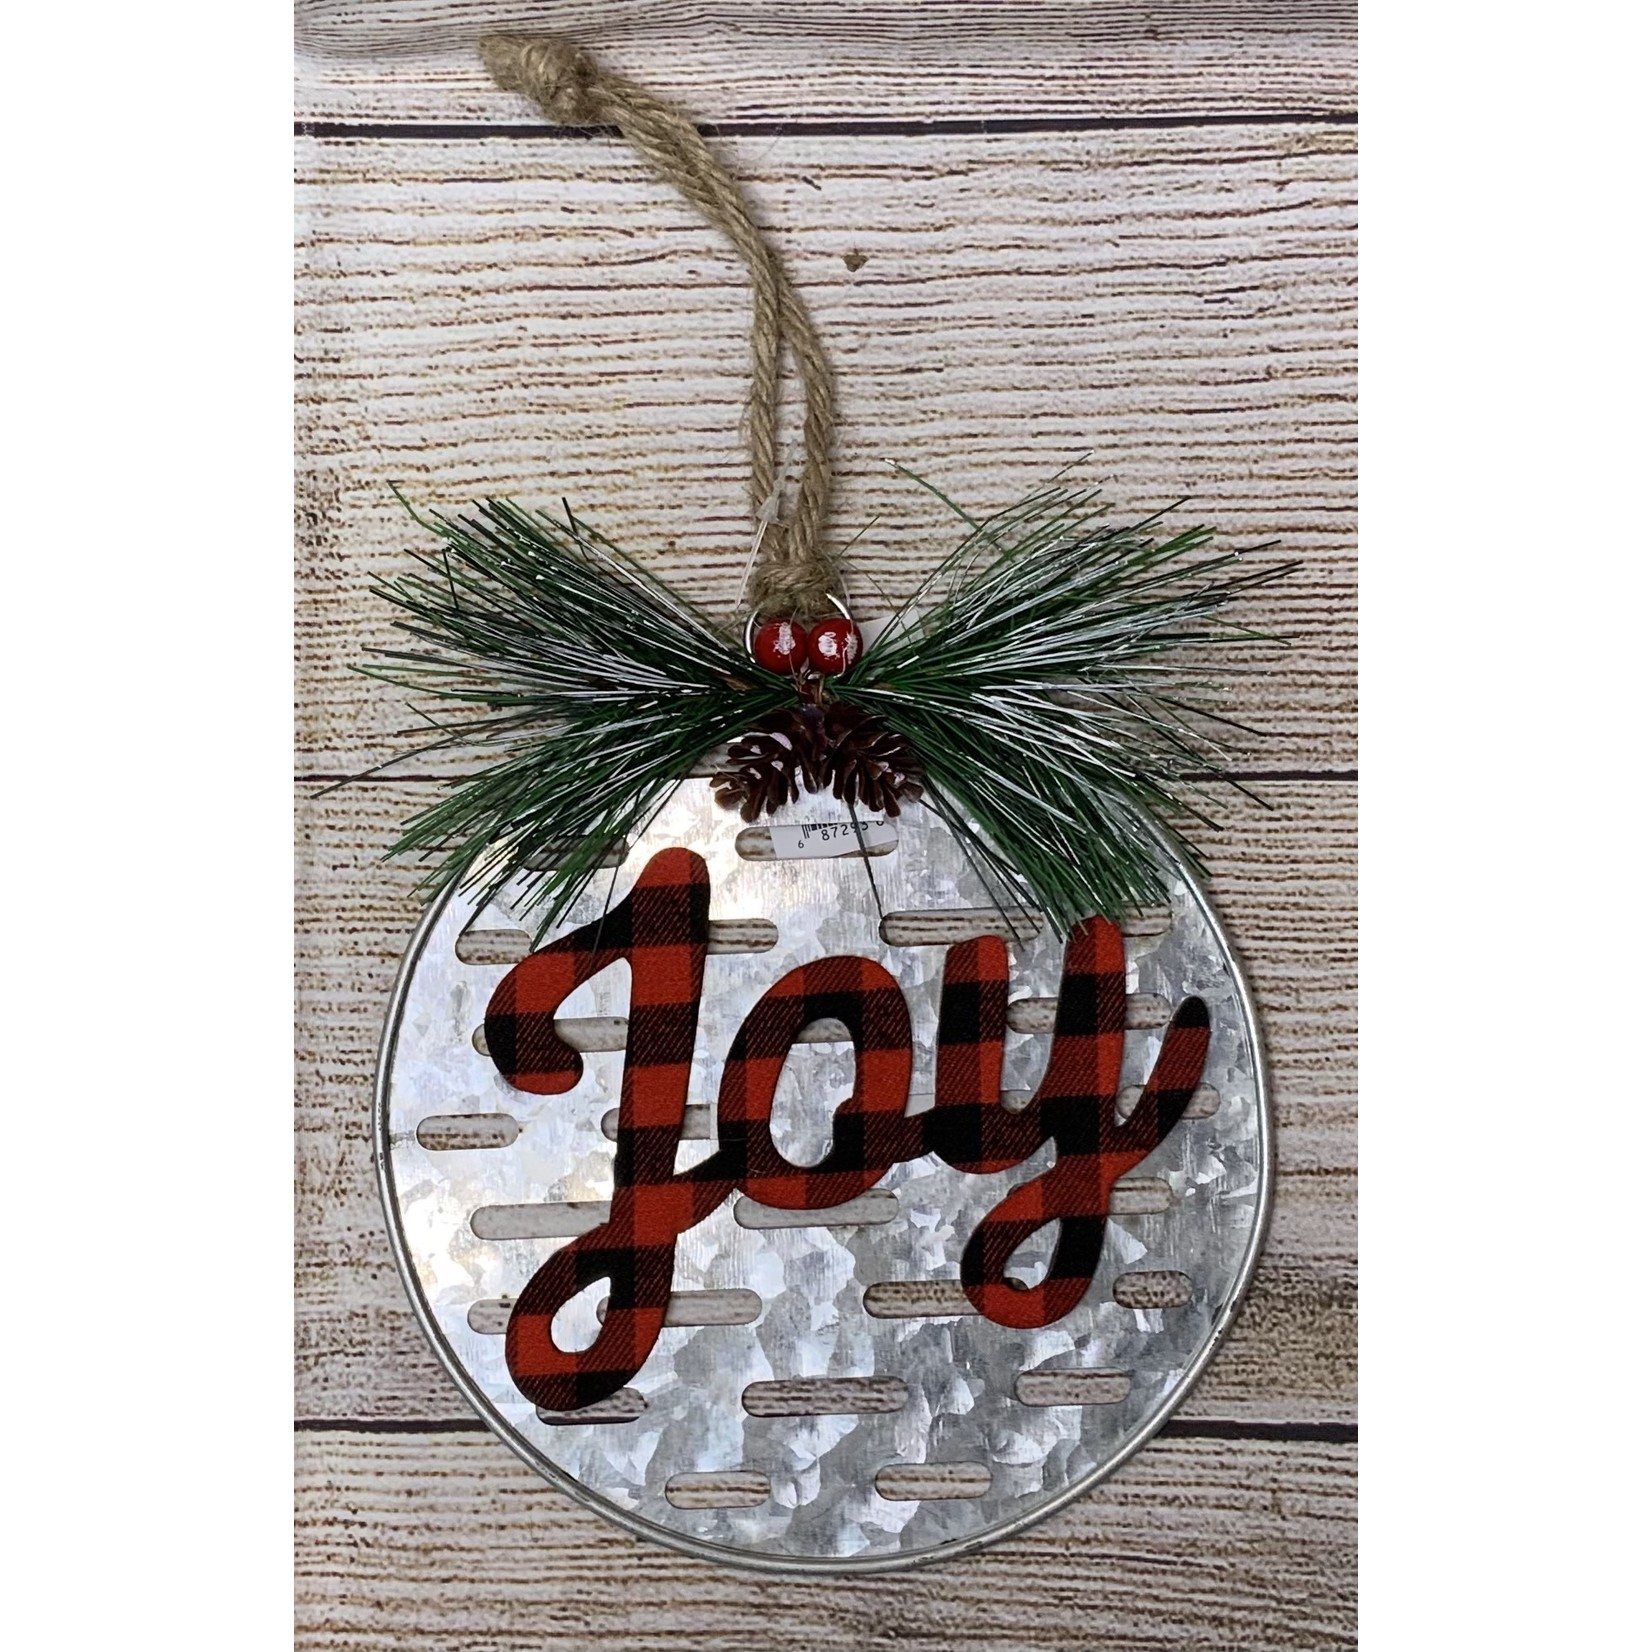 Gerson Metal Holiday Ornament